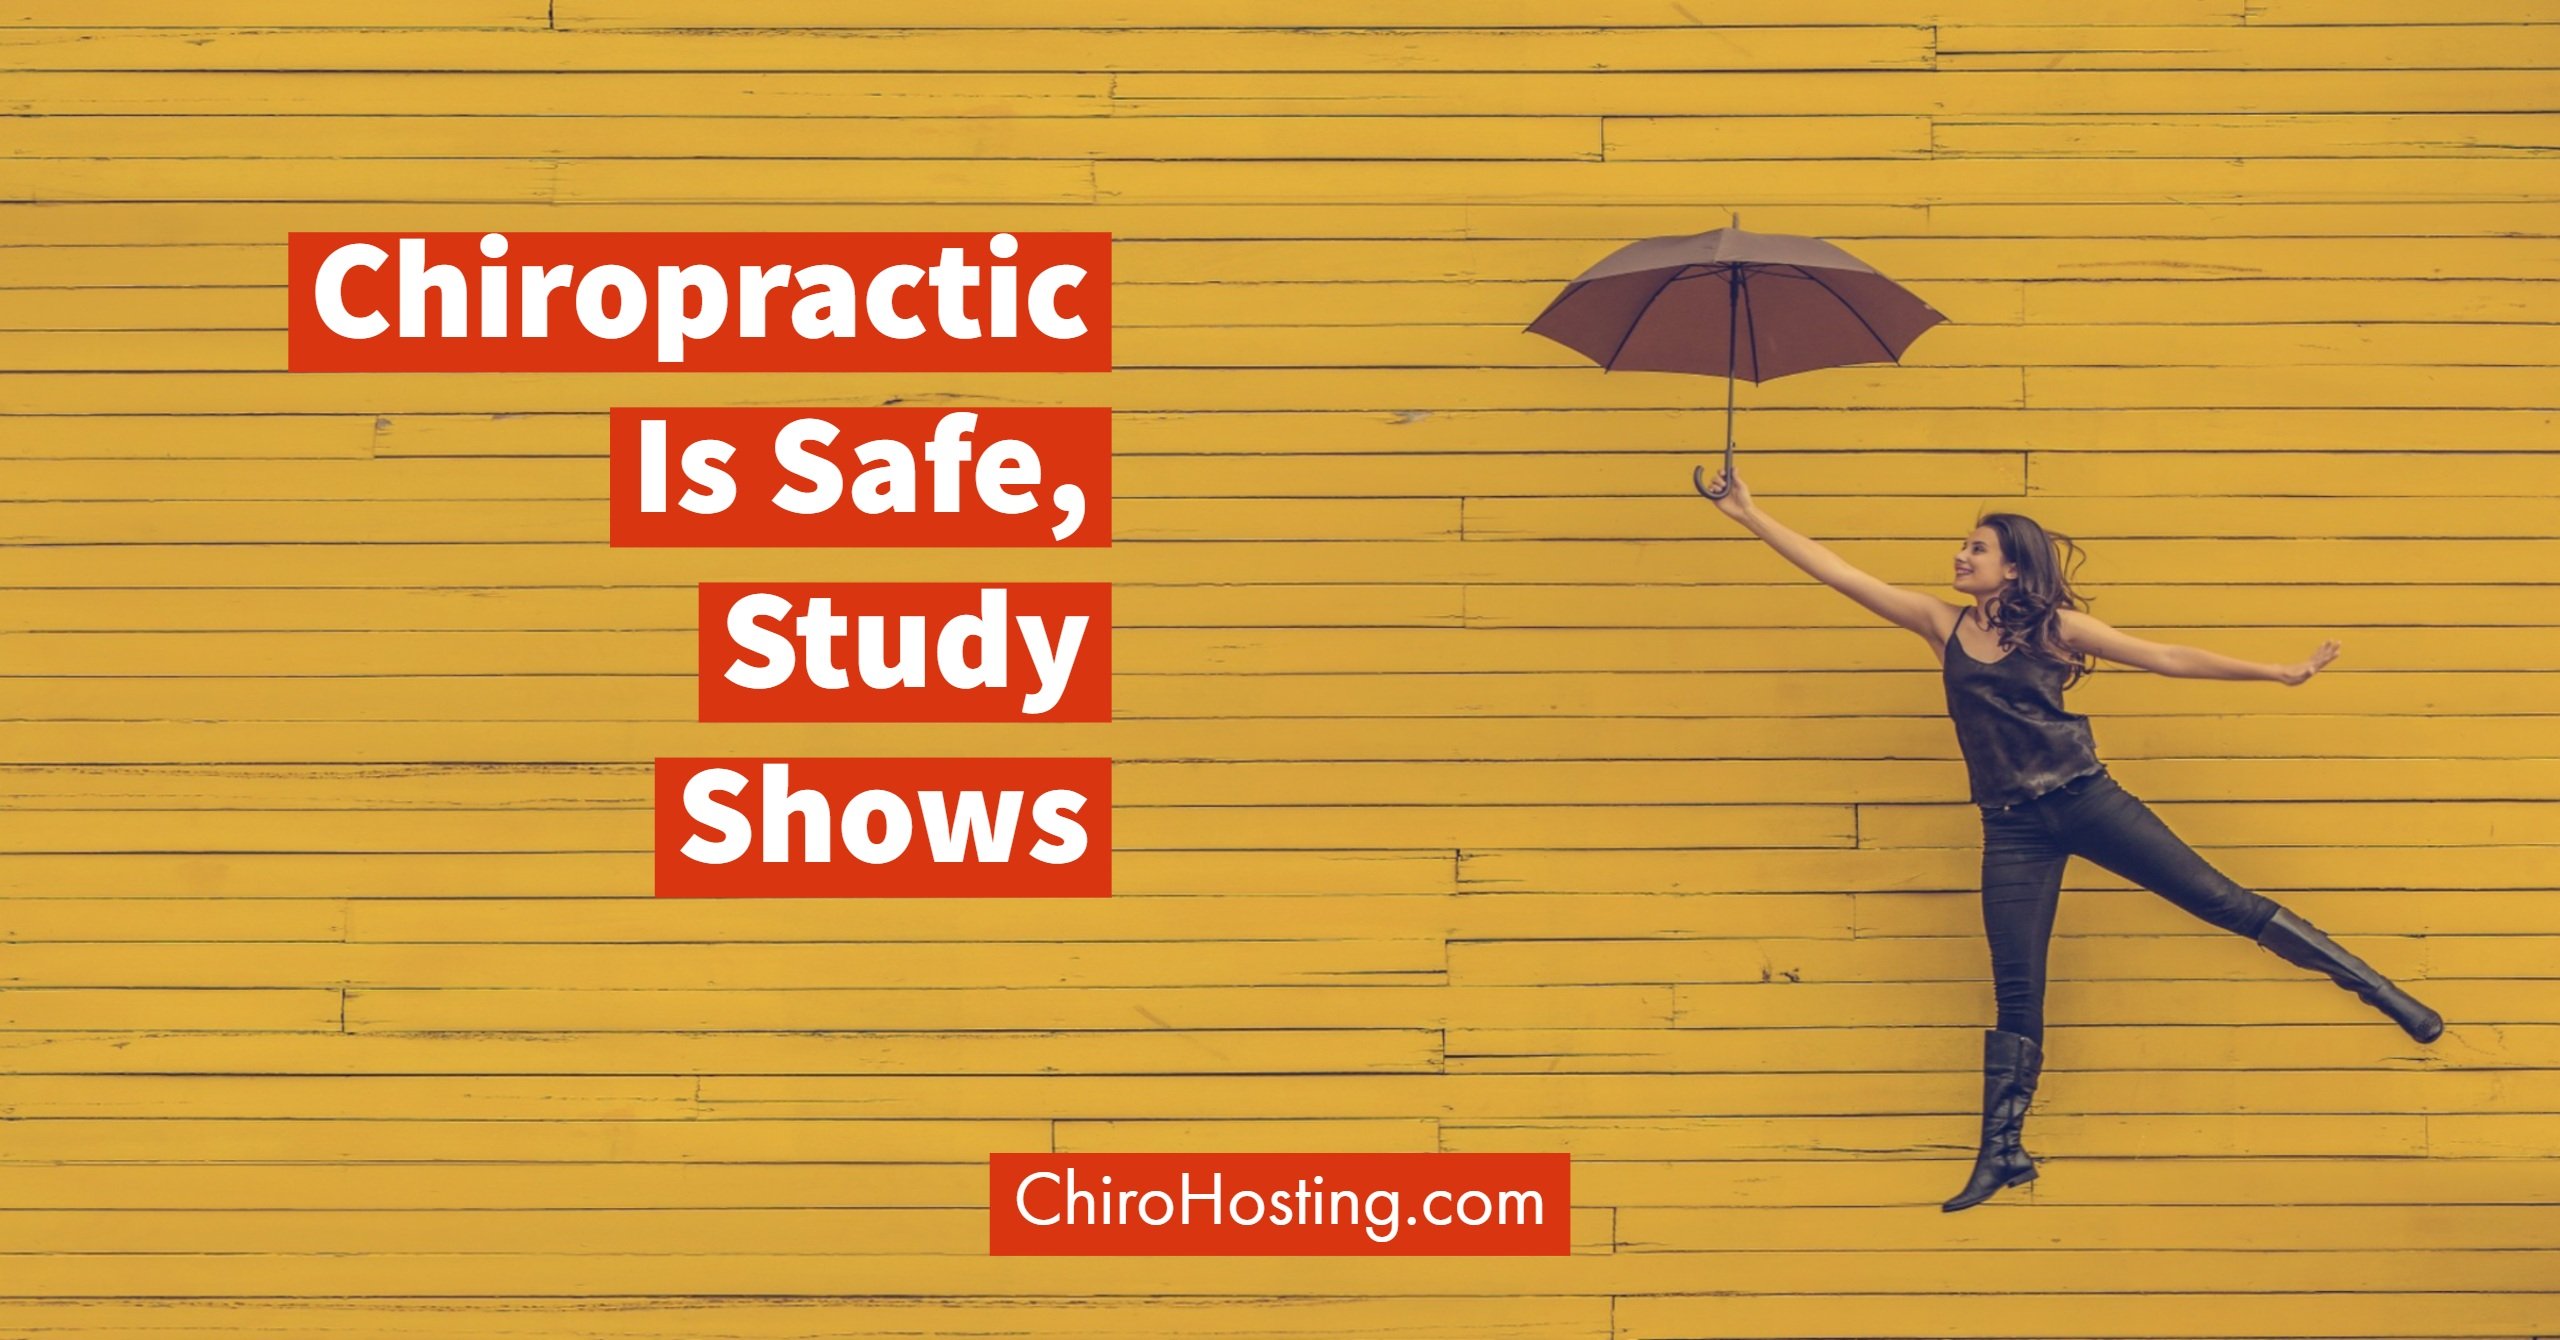 Chiropractic Is Safe, Study Shows